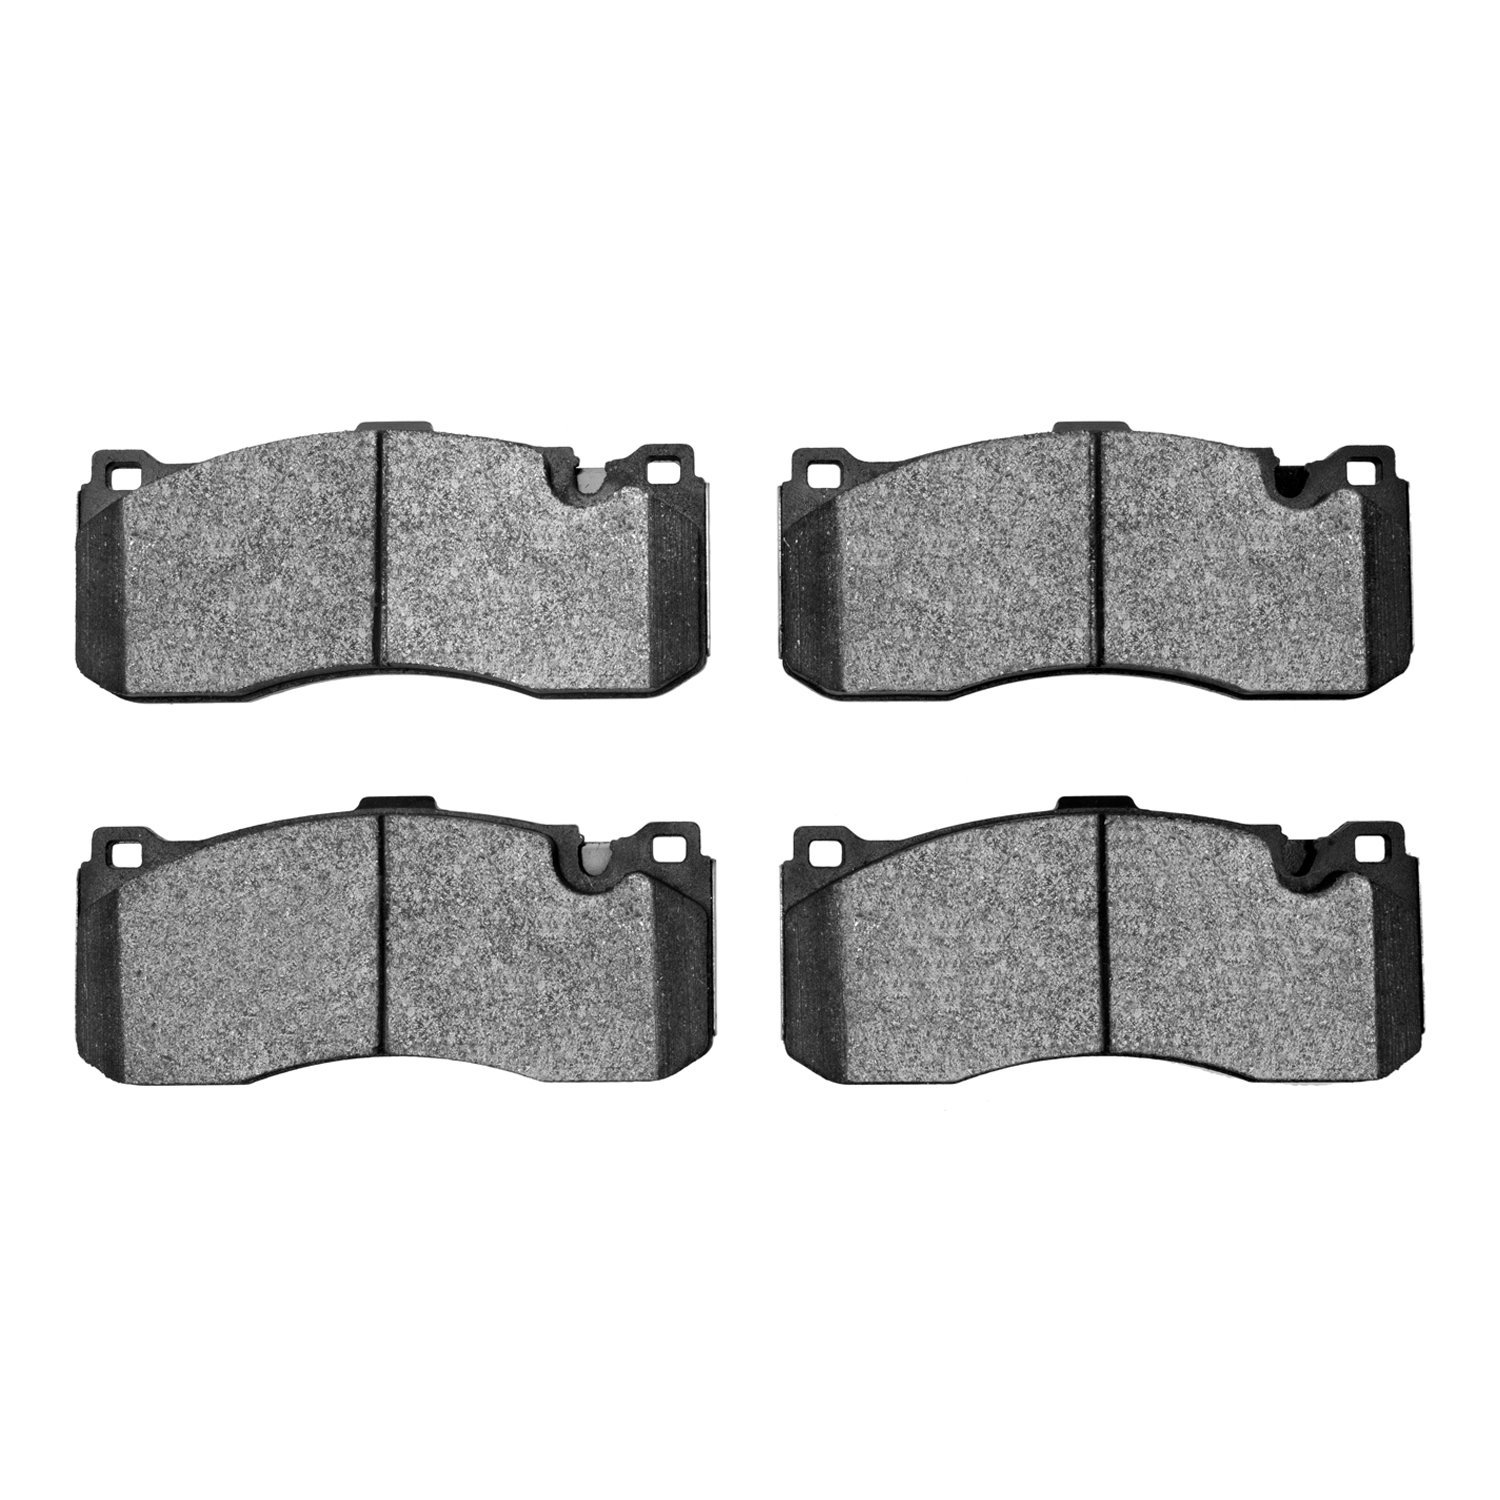 1551-1371-00 5000 Advanced Low-Metallic Brake Pads, 2008-2013 Multiple Makes/Models, Position: Front